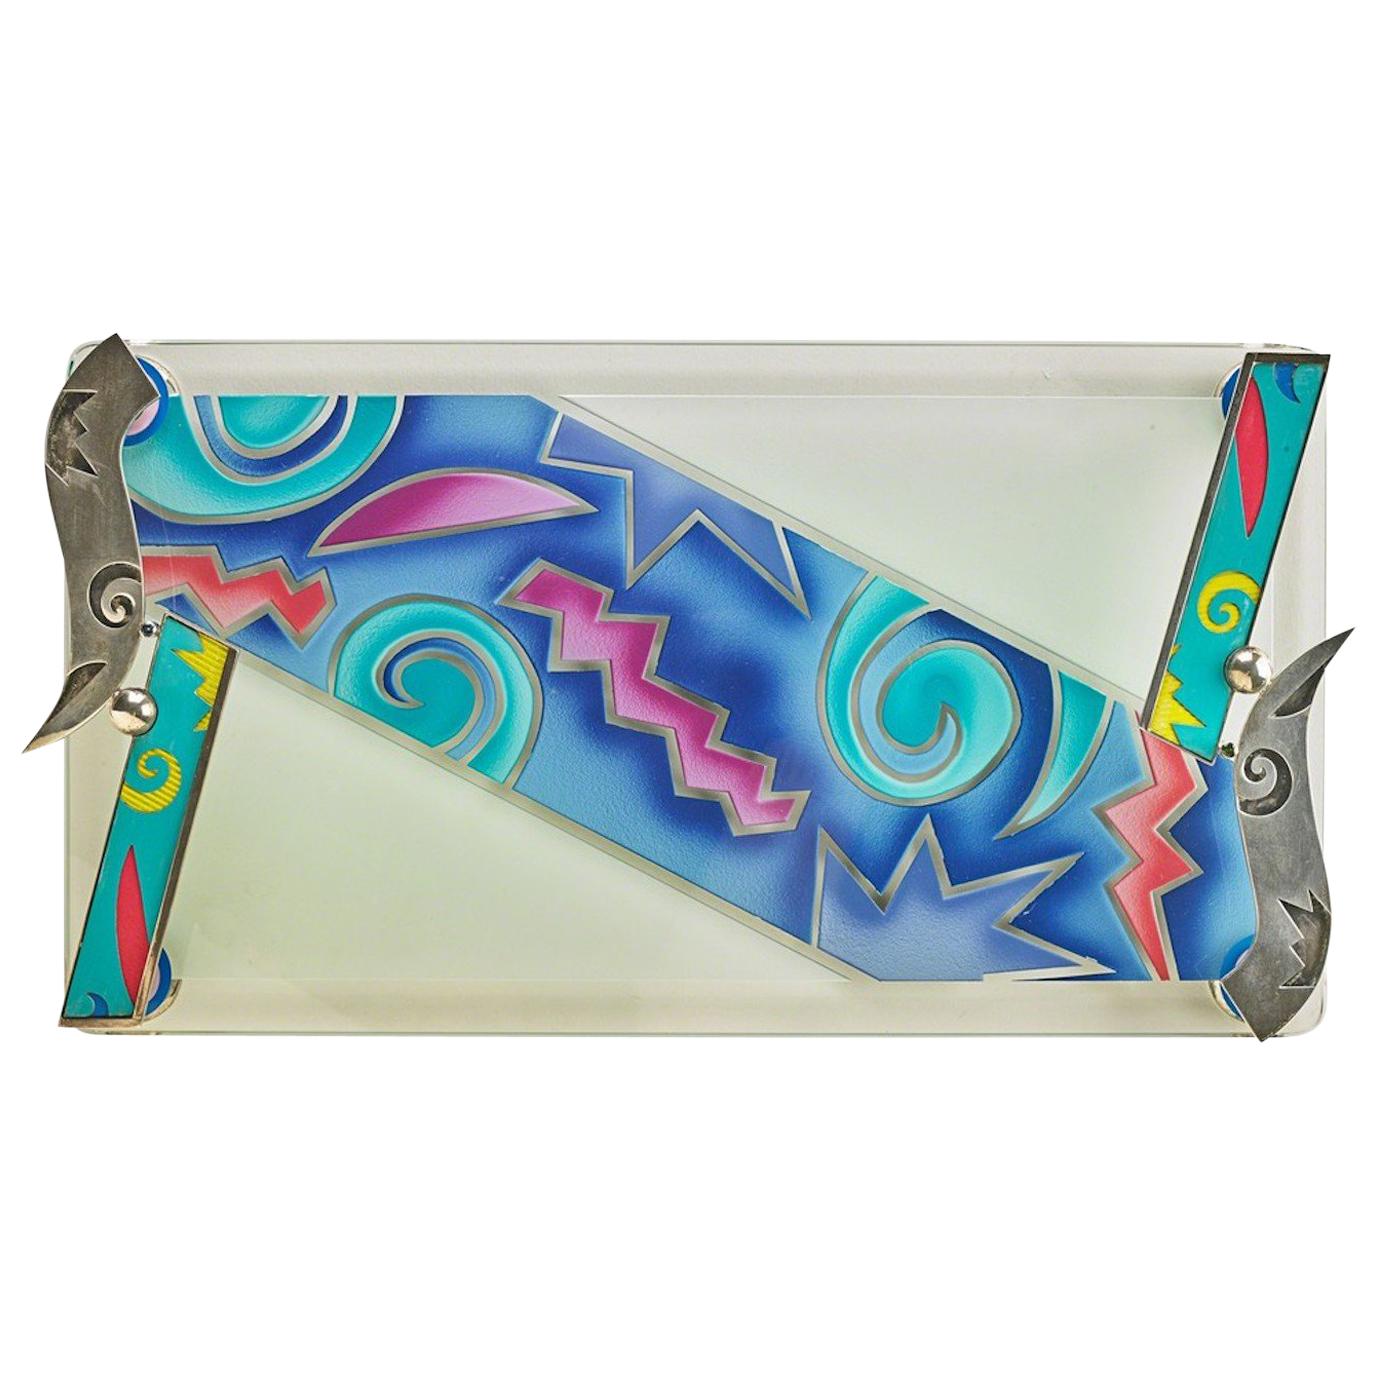 Fabulous Tycoon's Connoisseur limited edition glass modern serving tray!
An inspired piece of art by noted Silversmith museum artist--Mardi Jo Cohen and noted Glass Artist Joan Irving-a brilliant collaboration signed and dated 1993-in a very limited